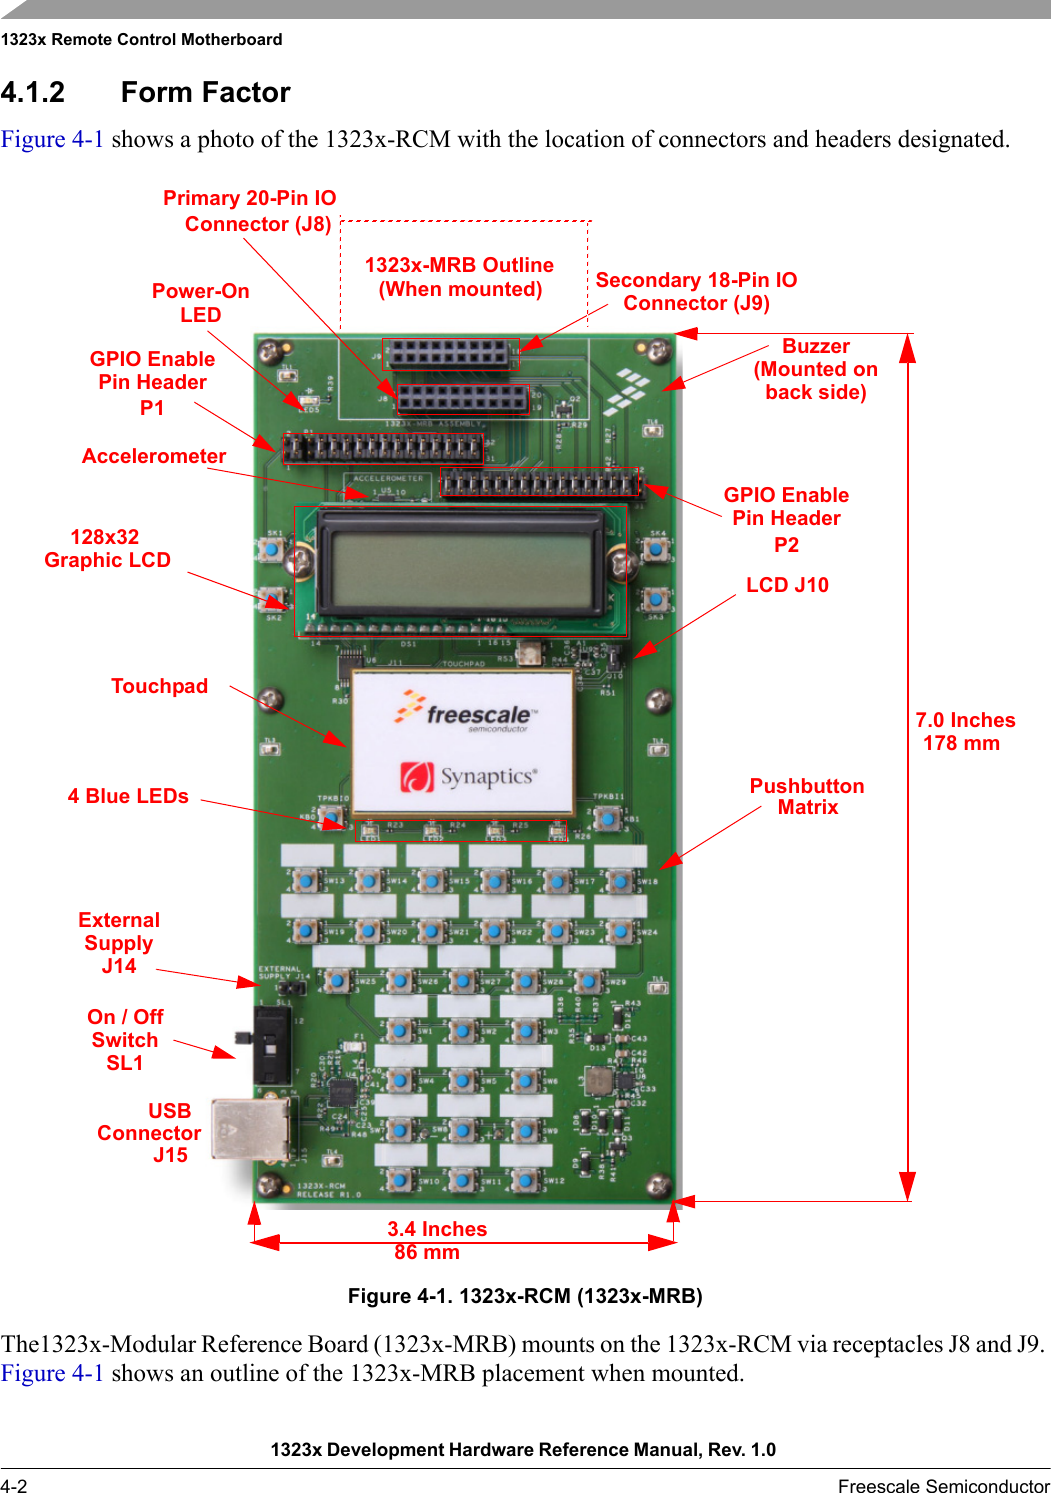 1323x Remote Control Motherboard1323x Development Hardware Reference Manual, Rev. 1.0 4-2 Freescale Semiconductor4.1.2 Form FactorFigure 4-1 shows a photo of the 1323x-RCM with the location of connectors and headers designated.Figure 4-1. 1323x-RCM (1323x-MRB)The1323x-Modular Reference Board (1323x-MRB) mounts on the 1323x-RCM via receptacles J8 and J9. Figure 4-1 shows an outline of the 1323x-MRB placement when mounted.PushbuttonUSBPrimary 20-Pin IOConnector (J8)On / OffSecondary 18-Pin IOConnector (J9)128x32 MatrixConnectorJ15SwitchSL11323x-MRB Outline(When mounted)4 Blue LEDsExternalSupplyJ14AccelerometerPower-OnGPIO EnablePin HeaderP1GPIO EnablePin HeaderP2Graphic LCDLEDTouchpadBuzzer(Mounted onback side)LCD J107.0 Inches178 mm3.4 Inches86 mm